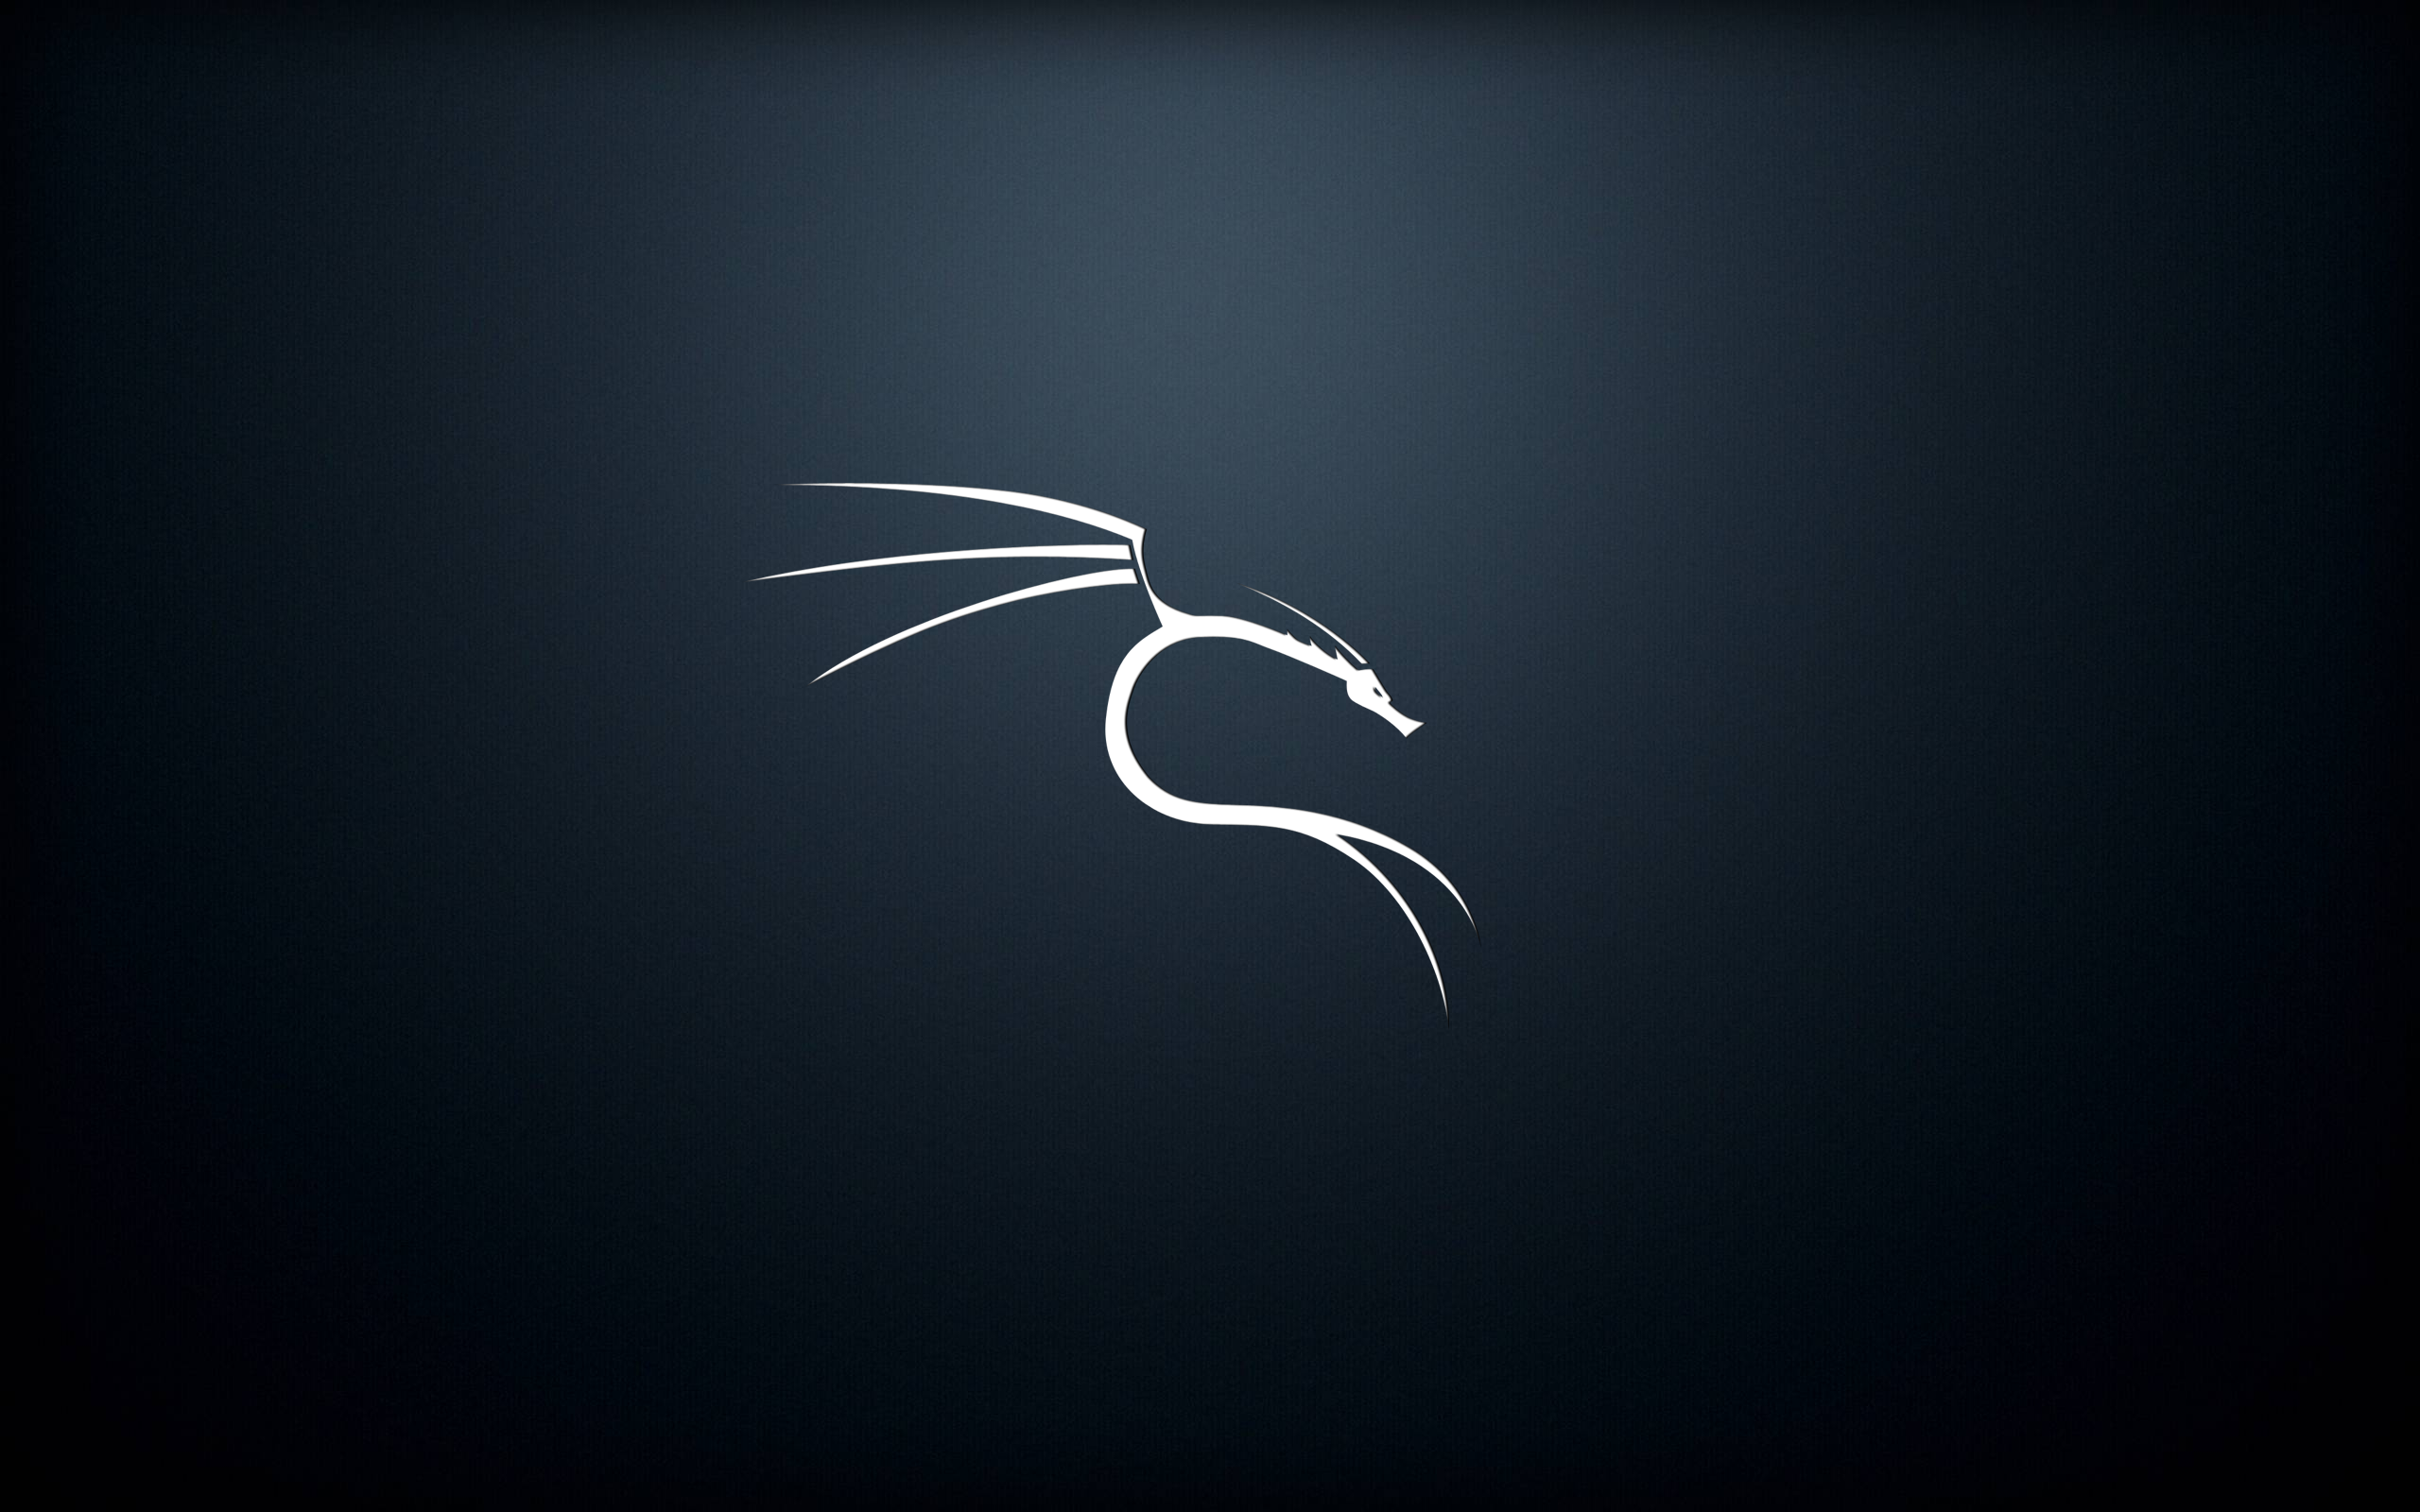 Github Dorianpro Kali Linux Wallpapers A Set Of Dedicated Kali Linux Wallpapers Which I M Going To Update Regularly They All Done Using Gimp And Other Gnu Linux Foss